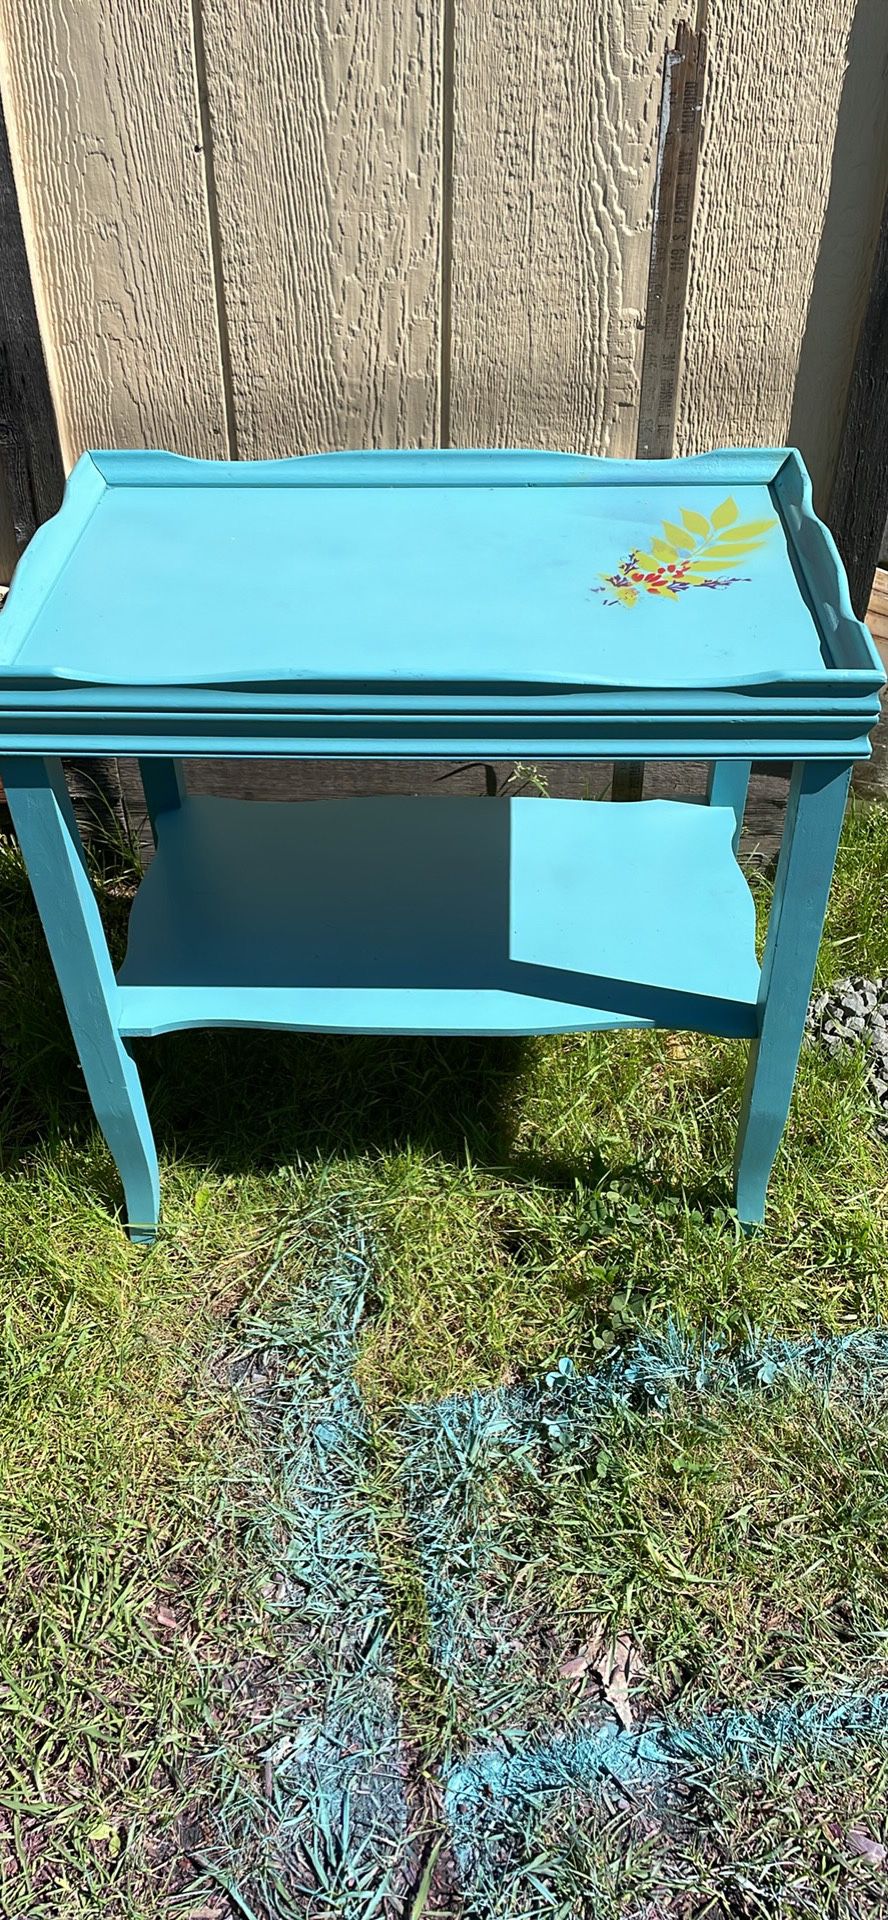 Wood TEAL Side Table 2-Tier. 24”x23”x14